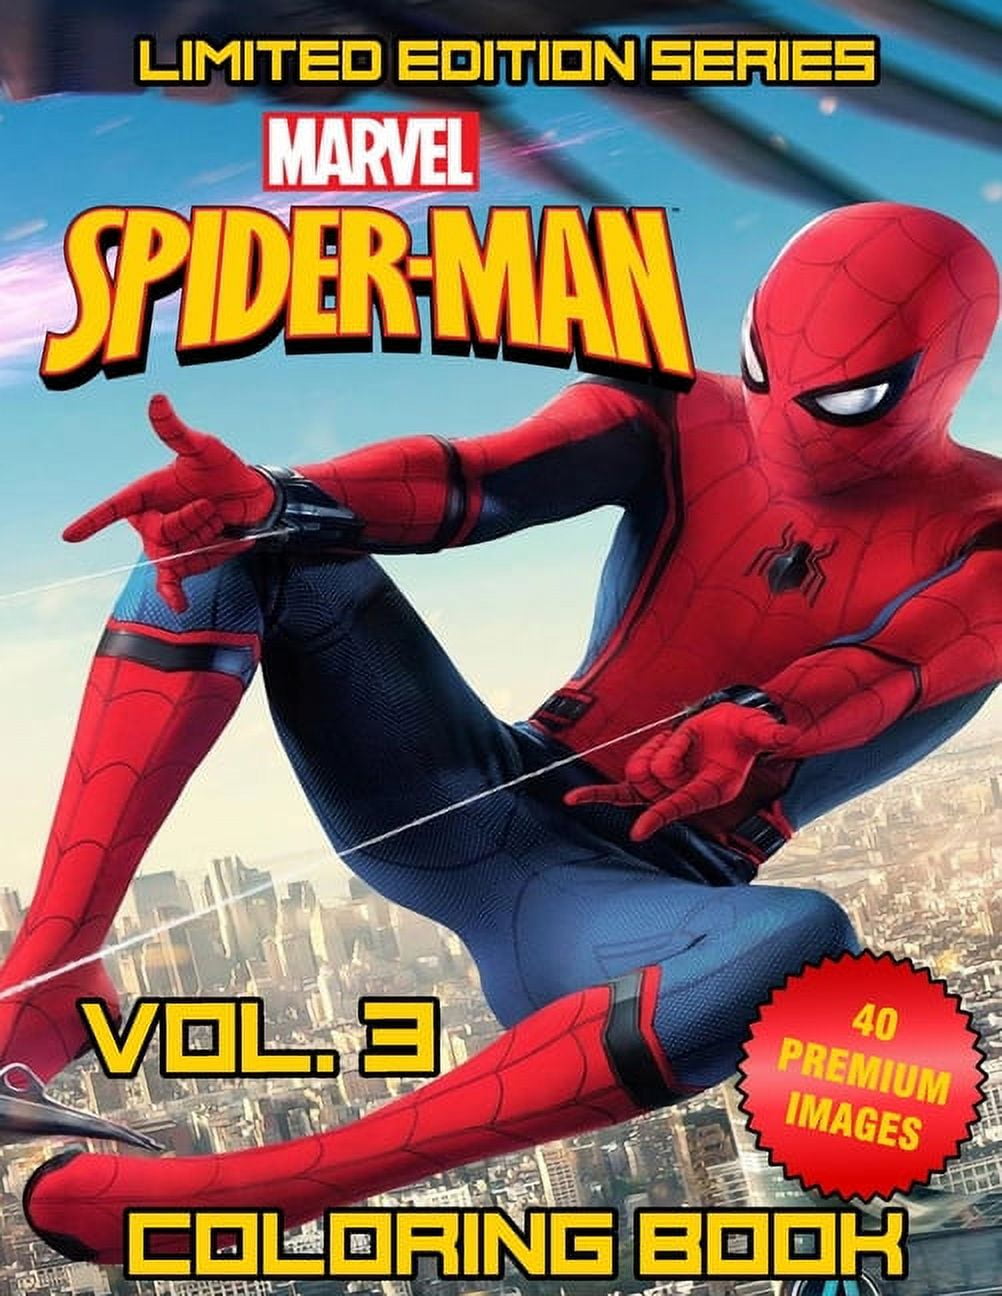 Spiderman Coloring Book for Kids and Adults (Paperback) 